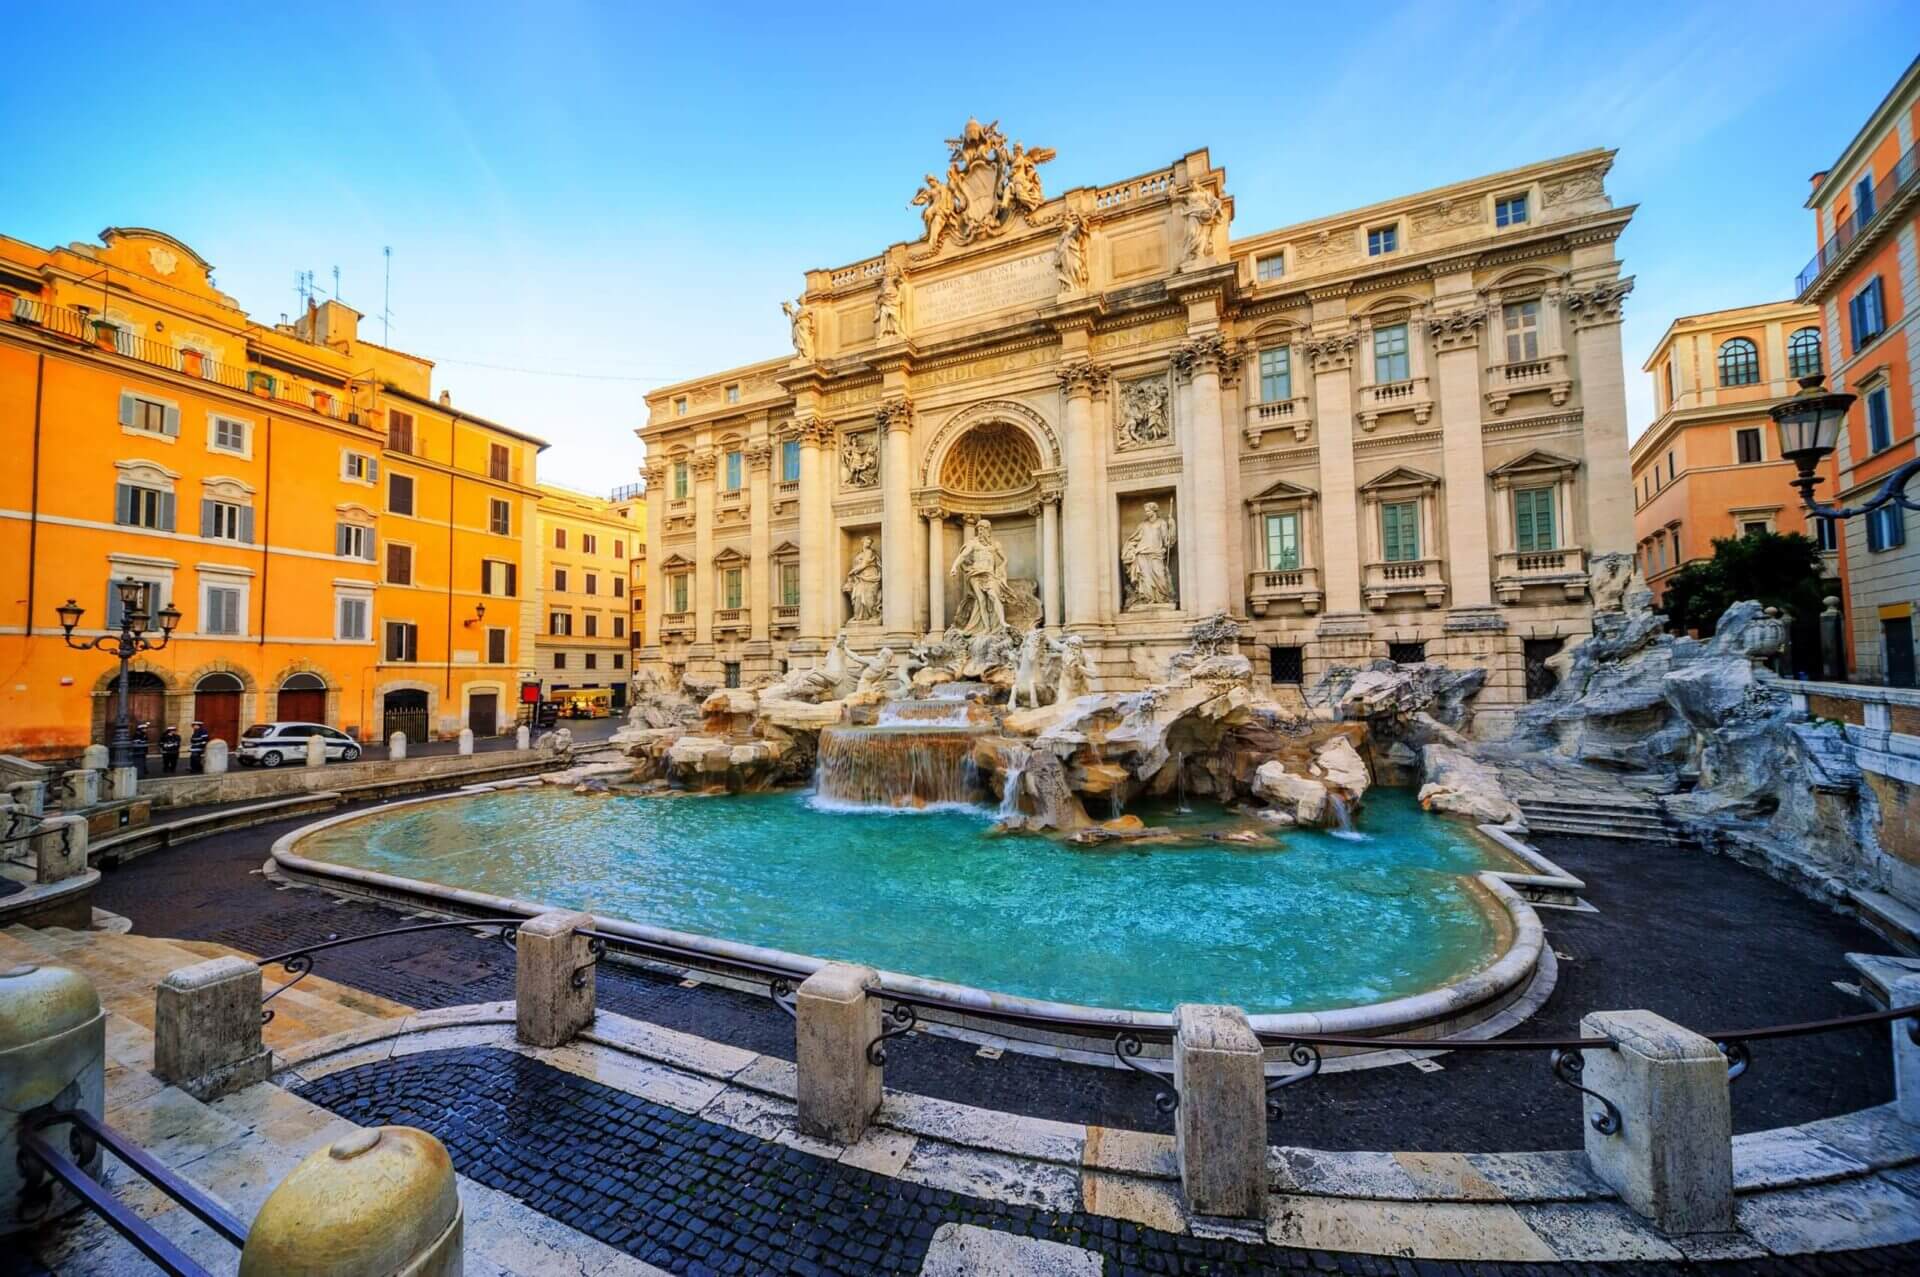 the-trevi-fountain-rome-italy-in-the-morning-light-stockpack-istock